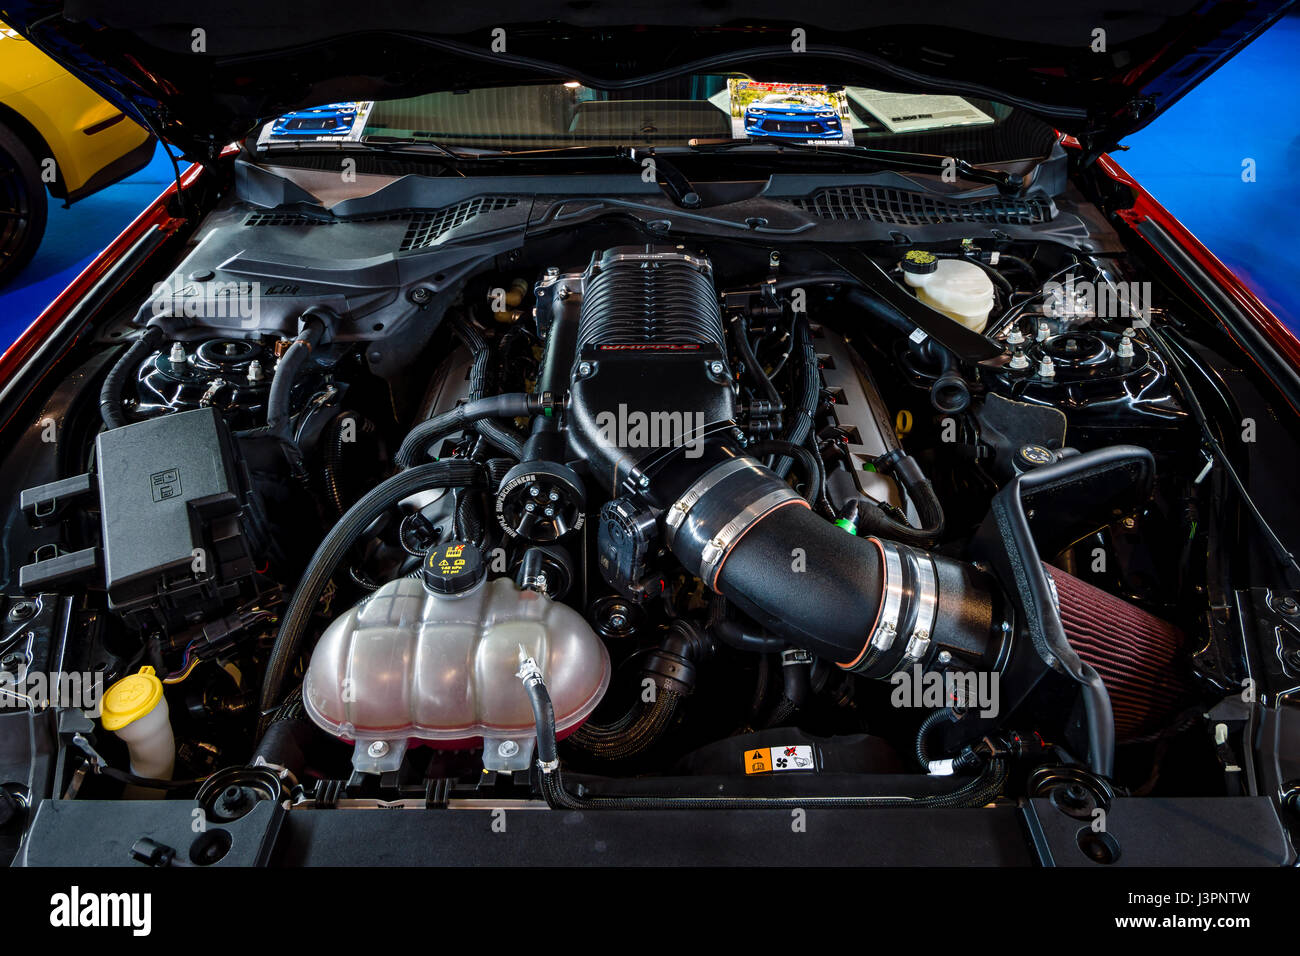 STUTTGART, GERMANY - MARCH 03, 2017: Engine of the Ford Mustang GT V8 Supercharged, 2017. Close-up. Europe's greatest classic car exhibition 'RETRO CLASSICS' Stock Photo